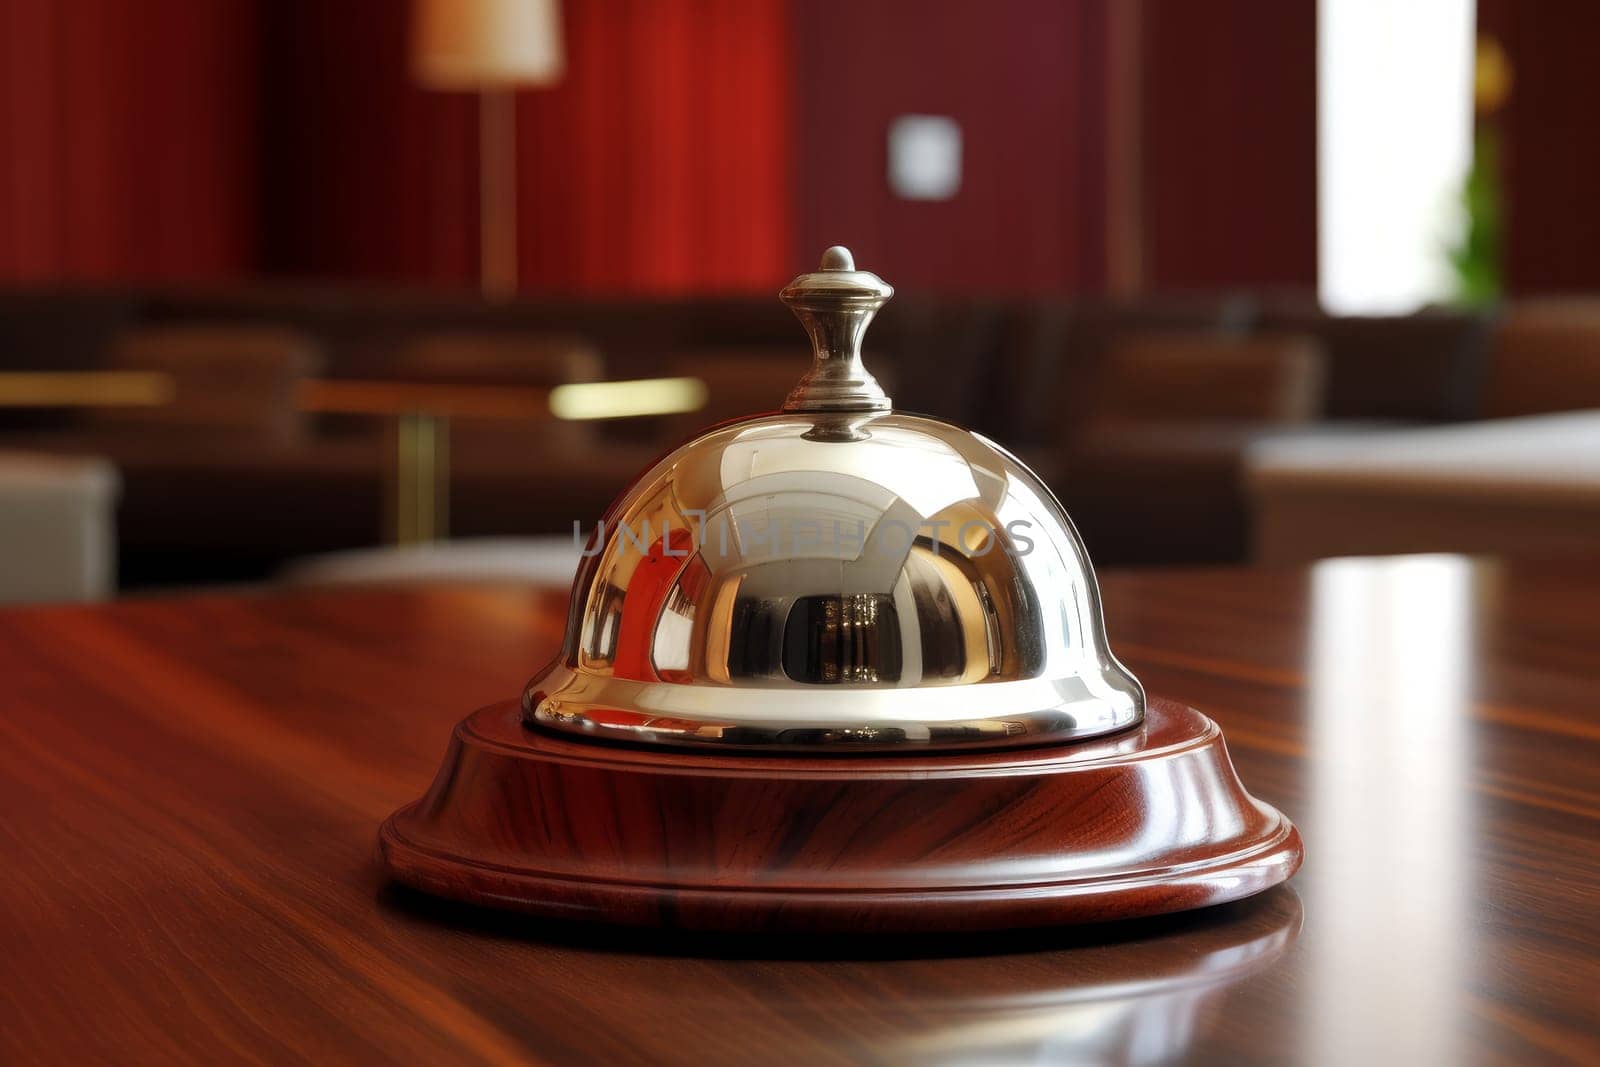 Handy Hotel service bell. Generate Ai by ylivdesign